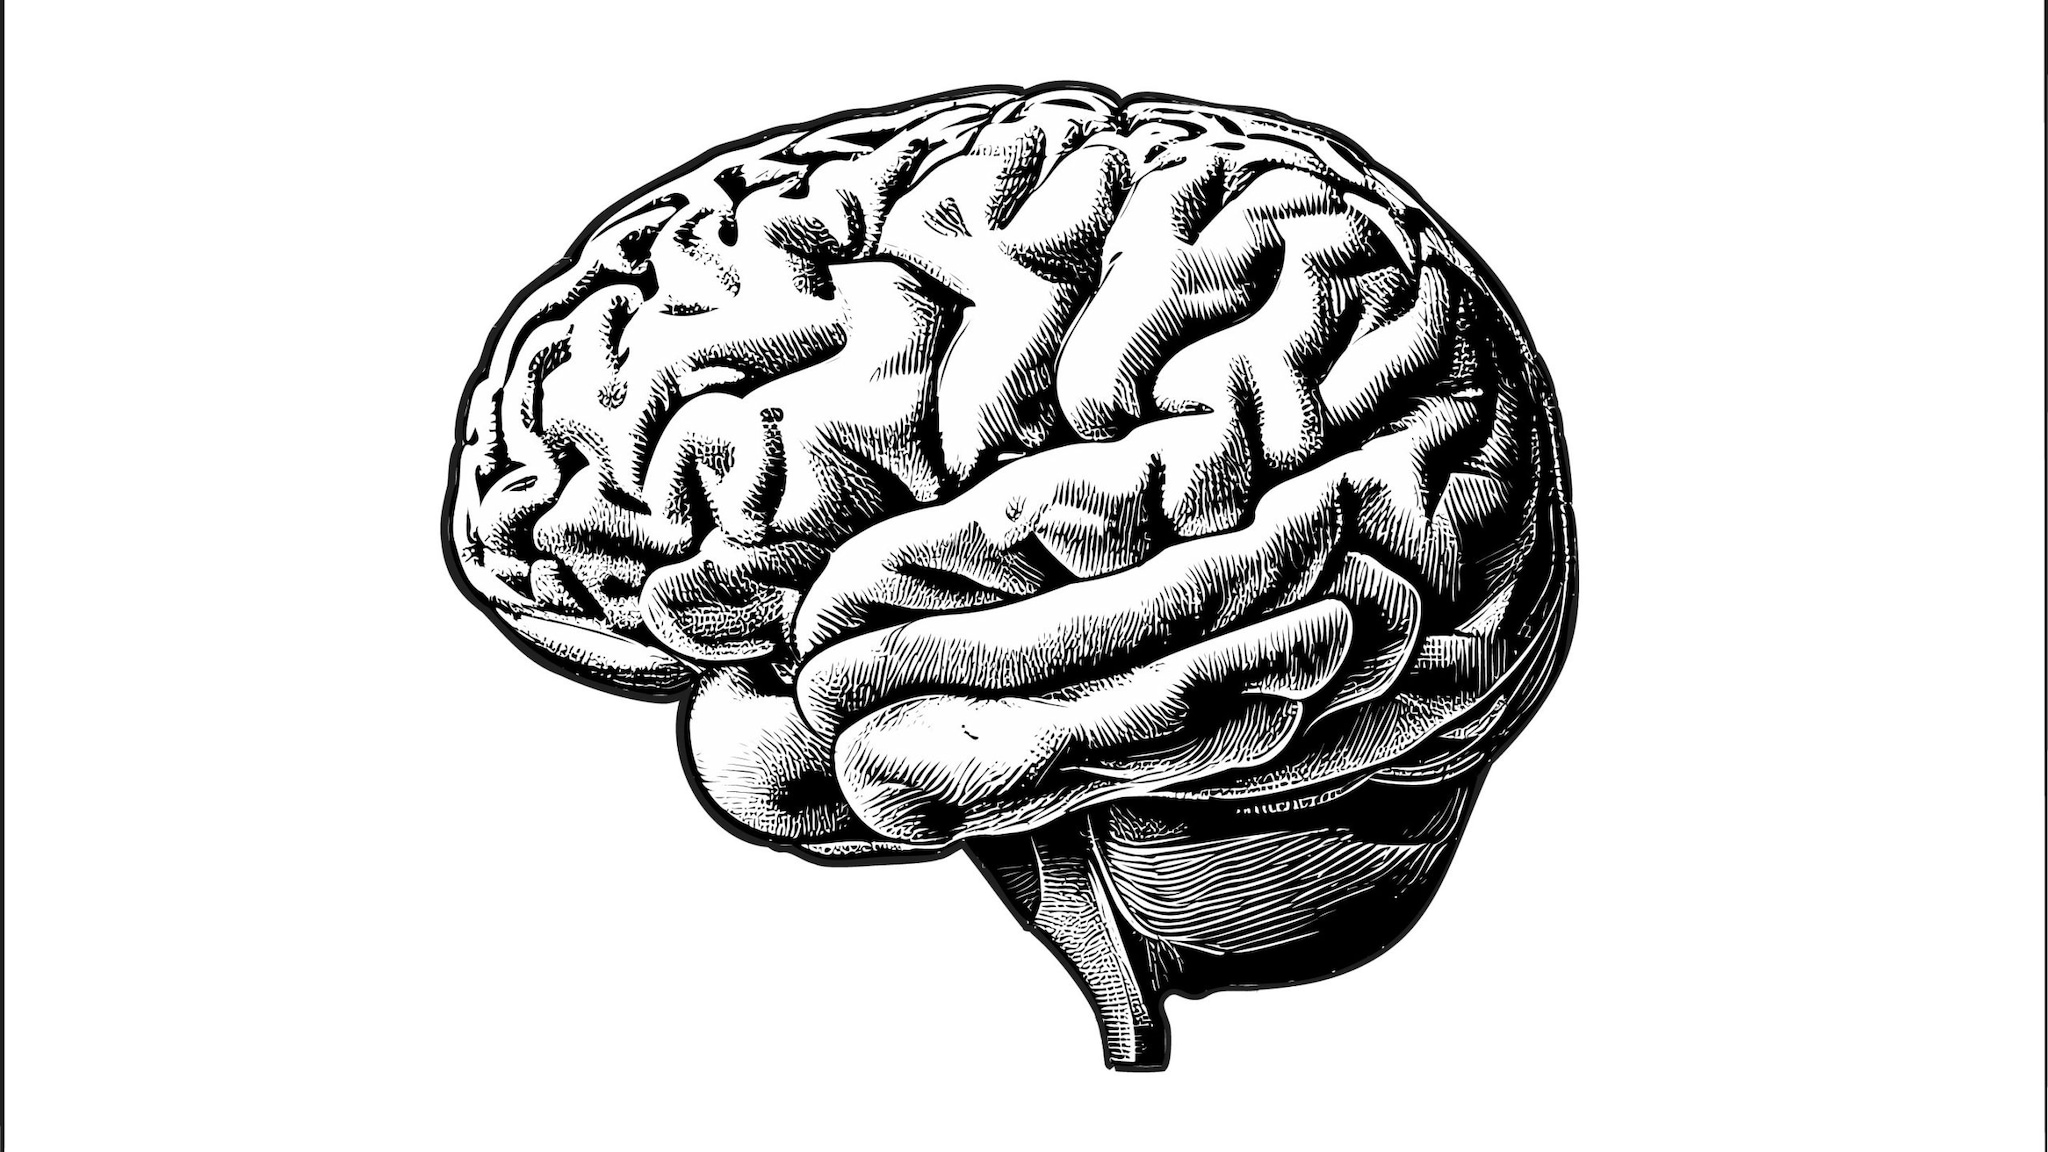 A black and white drawing of a human brain.